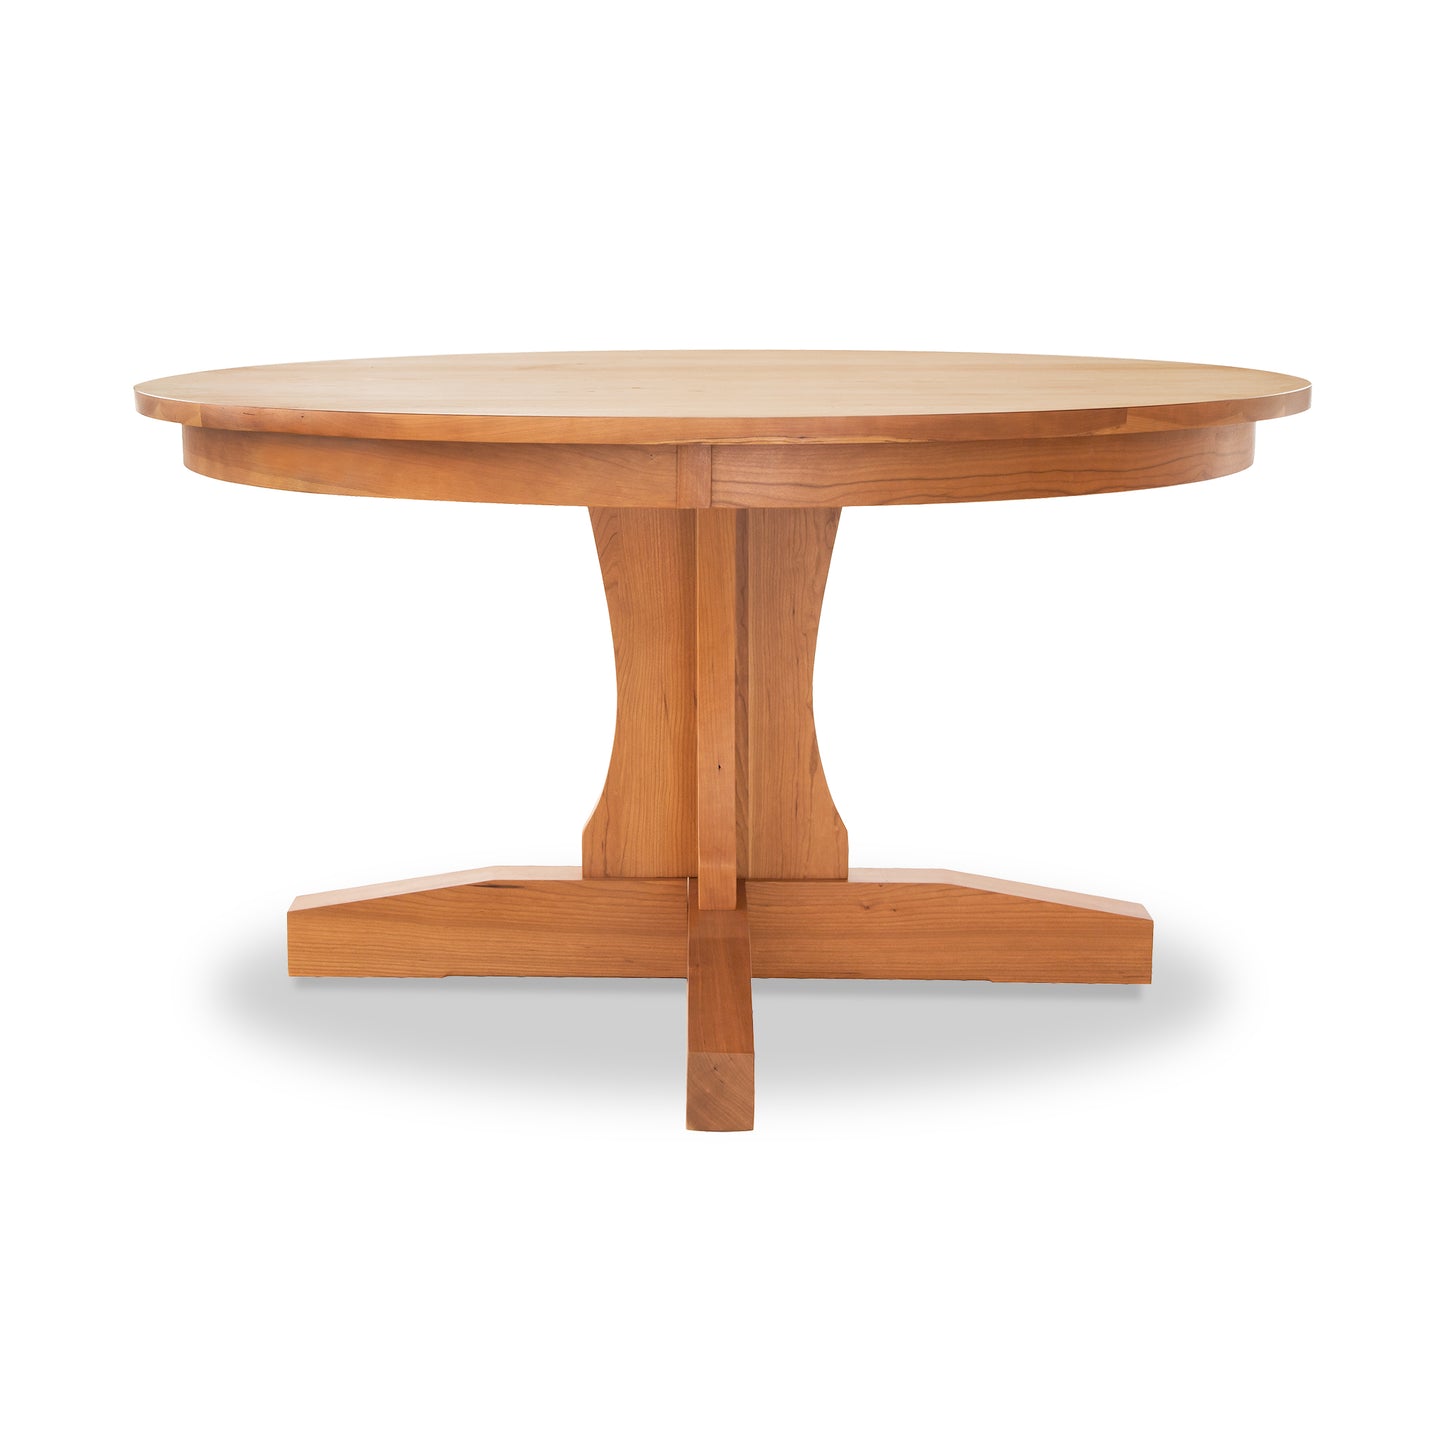 A Lyndon Furniture handmade New Traditions Round Pedestal Table with a wooden base and a natural finish.